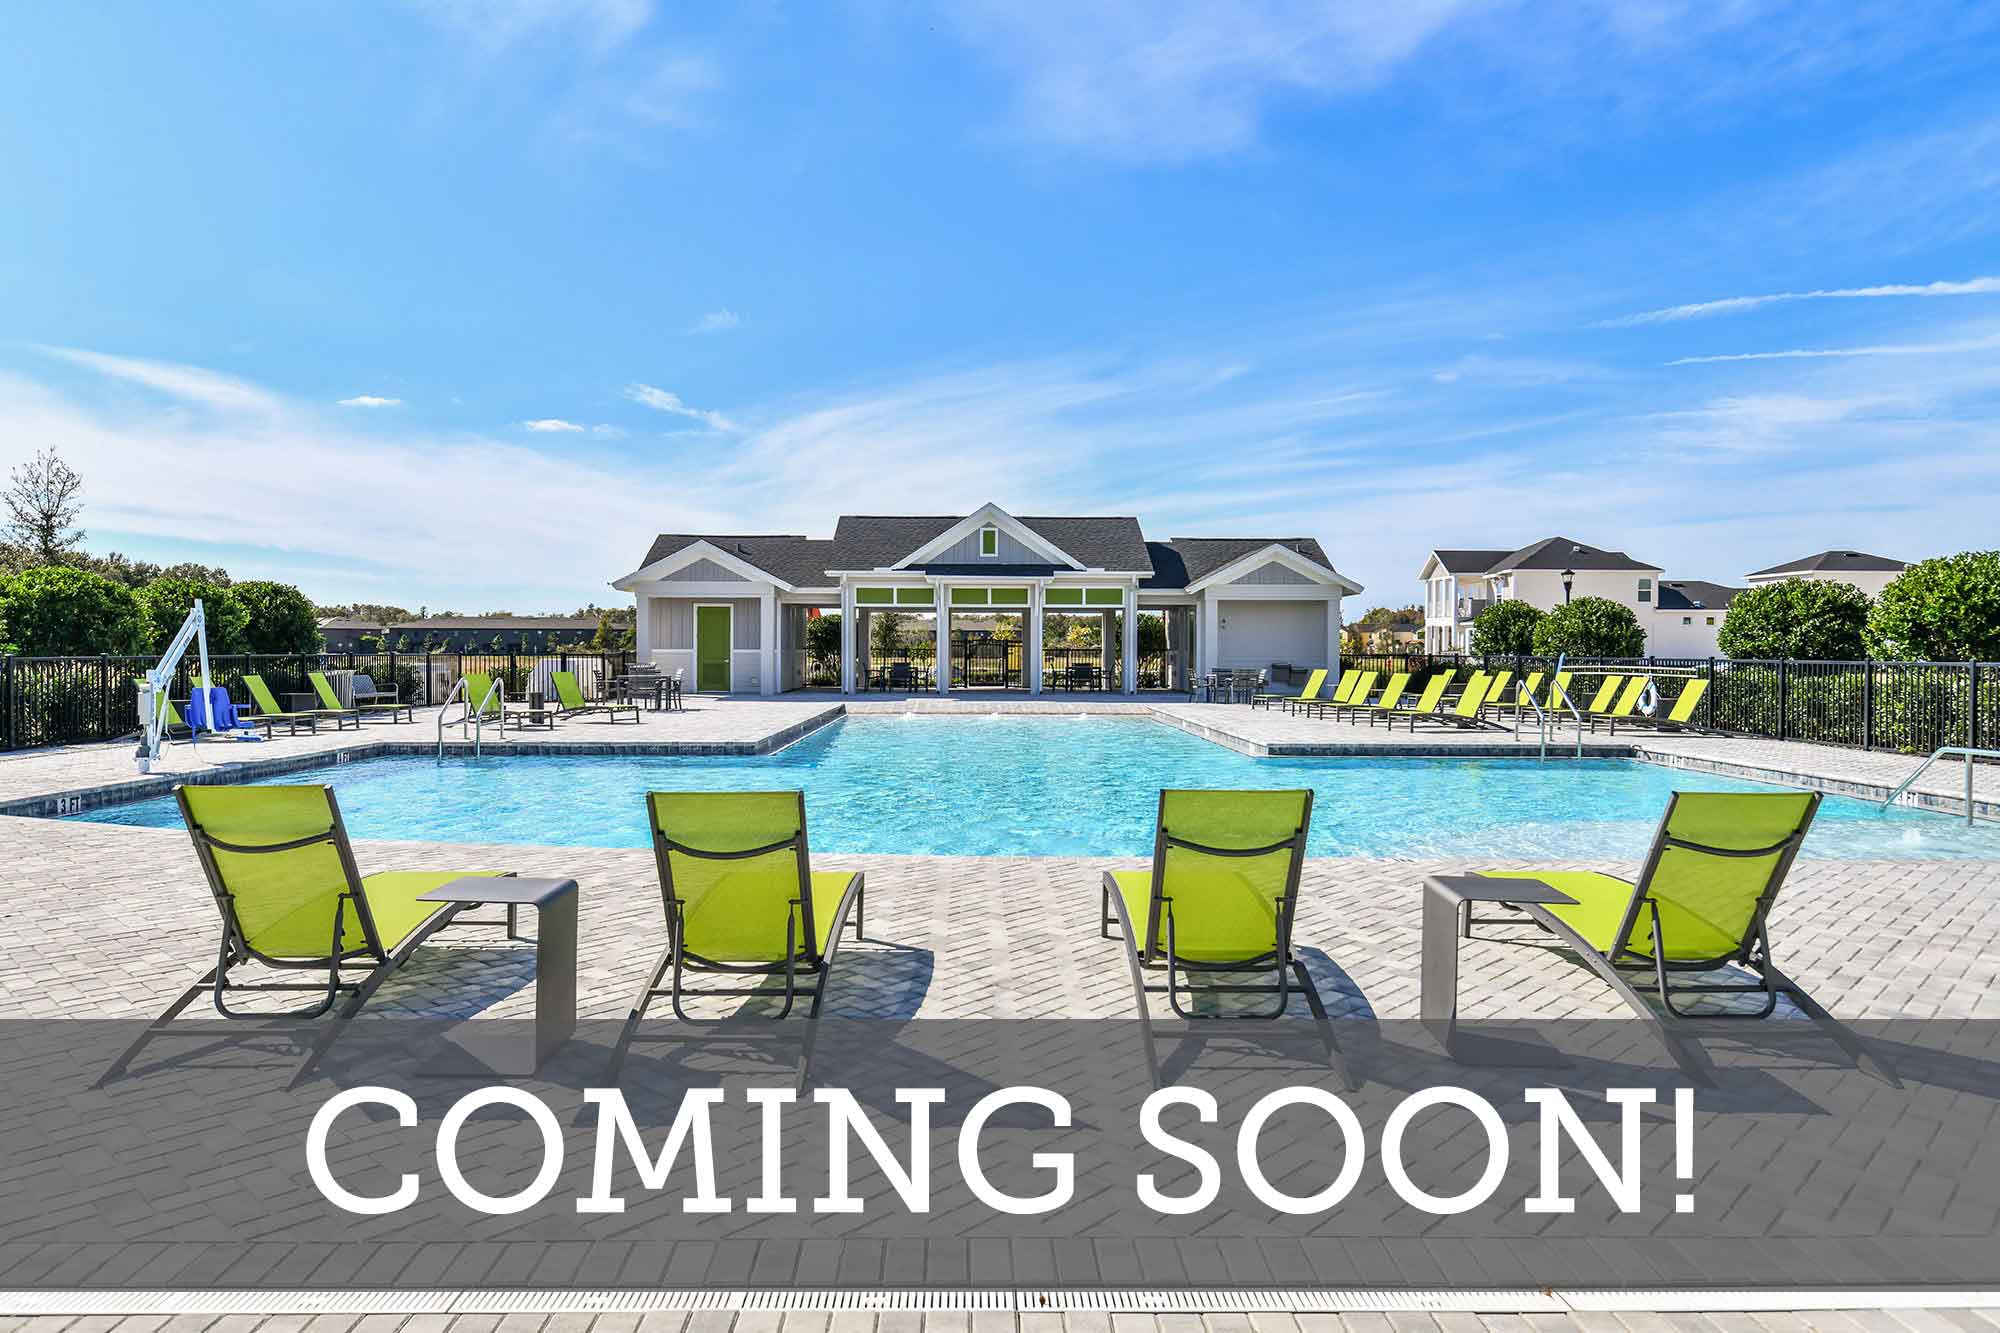 Persimmon Park - Cottage Series - Coming Soon